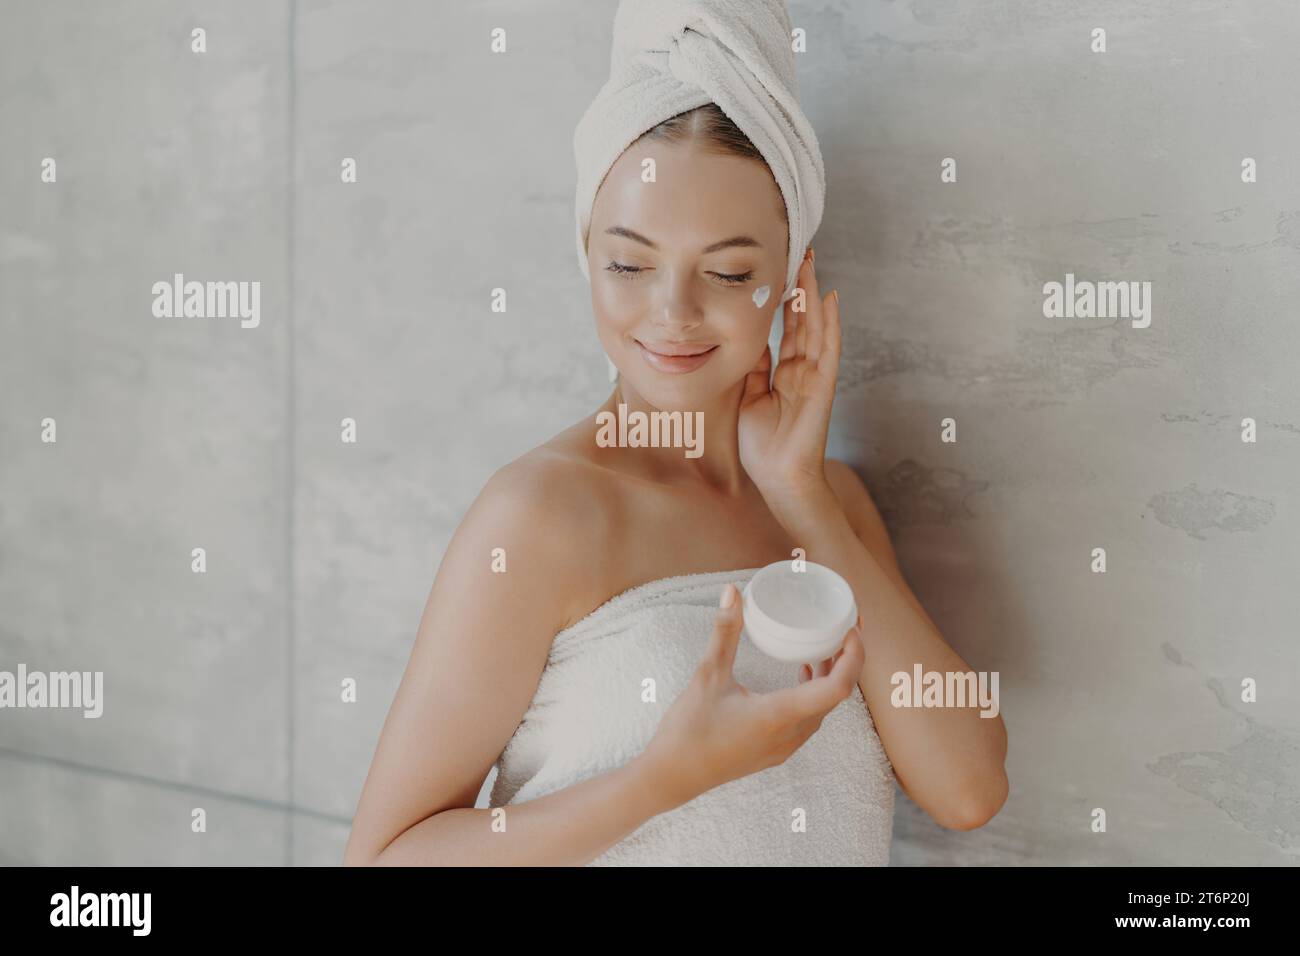 A woman with a towel turban applies cream, embodying a peaceful skincare moment Stock Photo